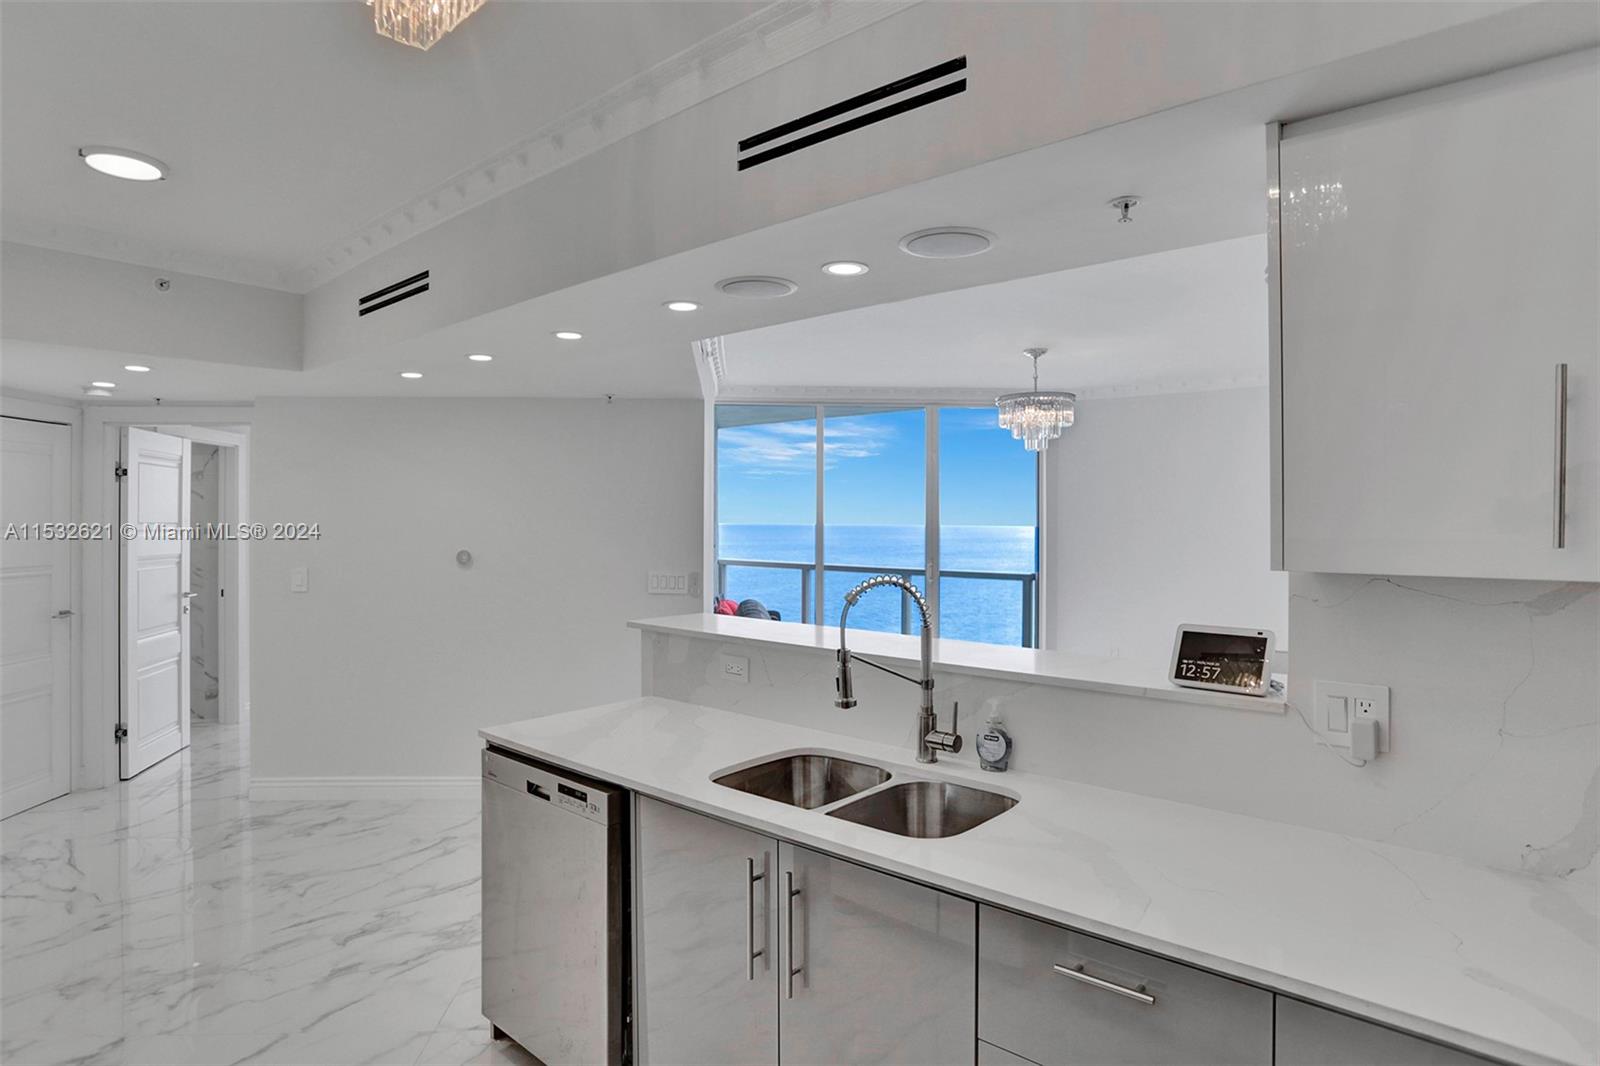 JUST FULLY RENOVATED AND UPGREATED BEAUTIFULL, FULLY FURNISHED AND EQUIPED 2 BEDROOMS AND 2 BATHROOMS UNIT WITH OCEN AND CITY VIEWS! FISRT LANE . GREAT AMENITES INCLUDS : BEACH SERVICE , POOL, GYM, BUSSINESS CENTER, 24H VALET PARKING, MANAGMENT ON SITE. BUILDING LOCATED IN THE HEART OF SUNNY ISLES BEACH , GREAT LOCATION: WALKING DISTANCE TO GROSERY STORES, SPA , BEAUTY SALONS AND ETS. SHORT-TERM RENTAS - STR-00330. AVAILABLE from JUNE 1,2024